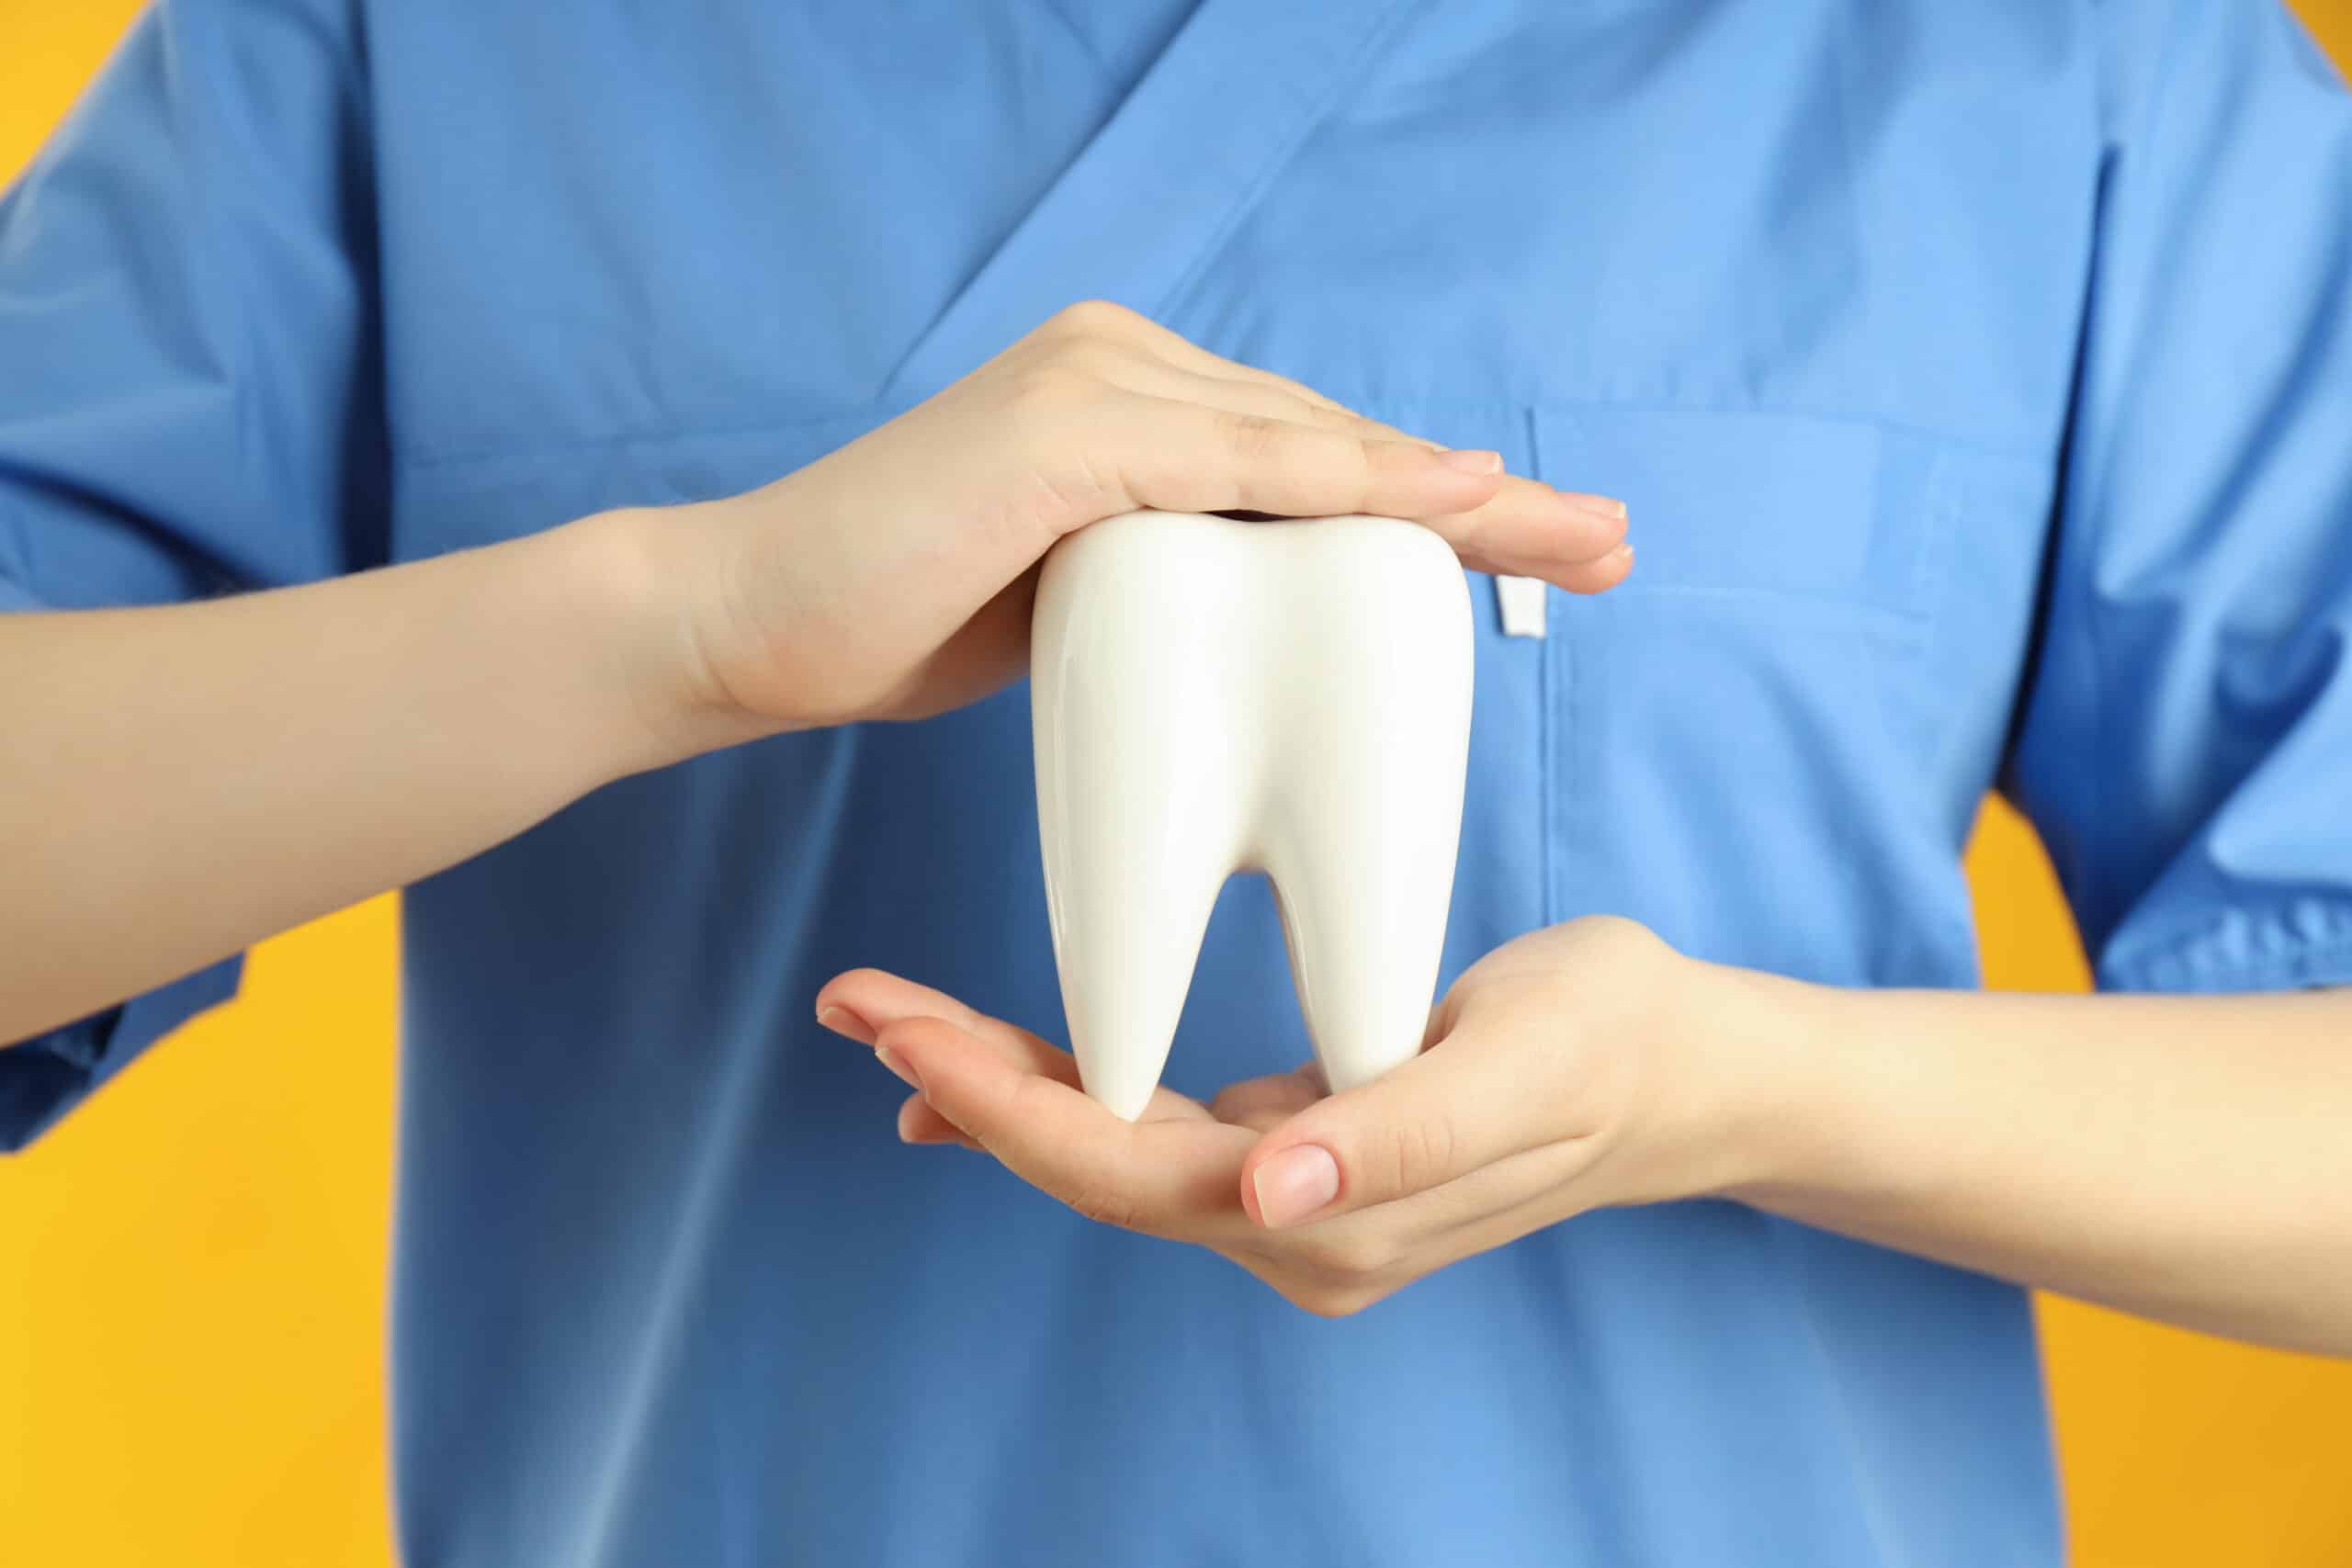 Trust our skilled professionals to provide safe and comfortable wisdom teeth removal, safeguarding your oral health and well-being.